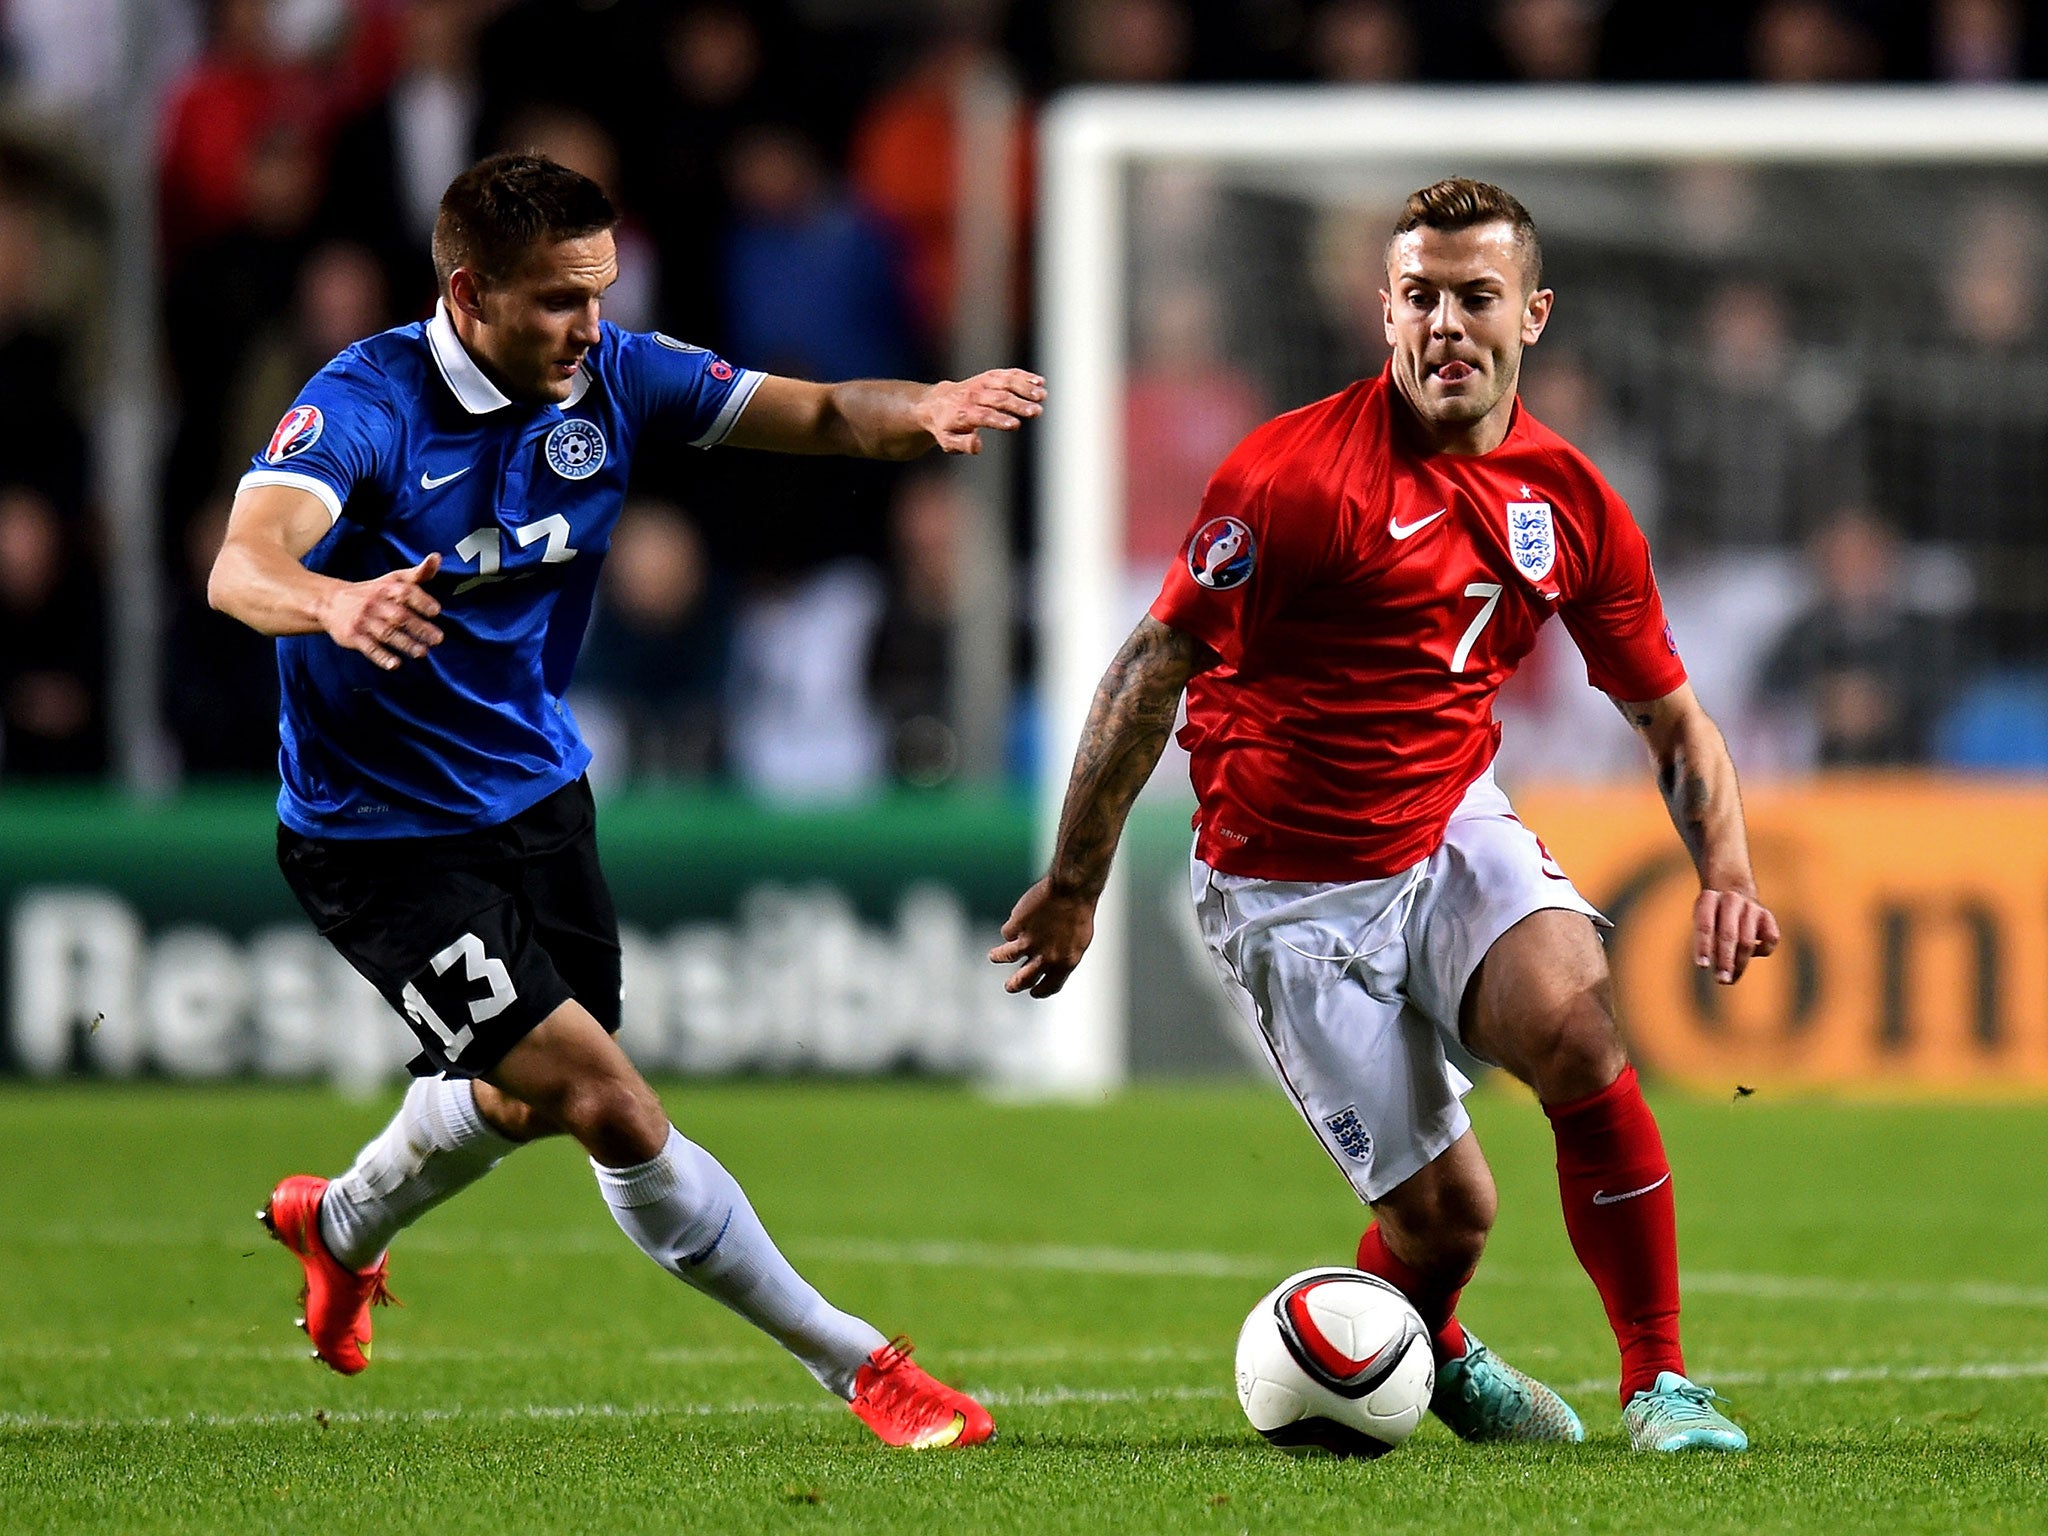 Jack Wilshere was excellent in a holding role for England this week